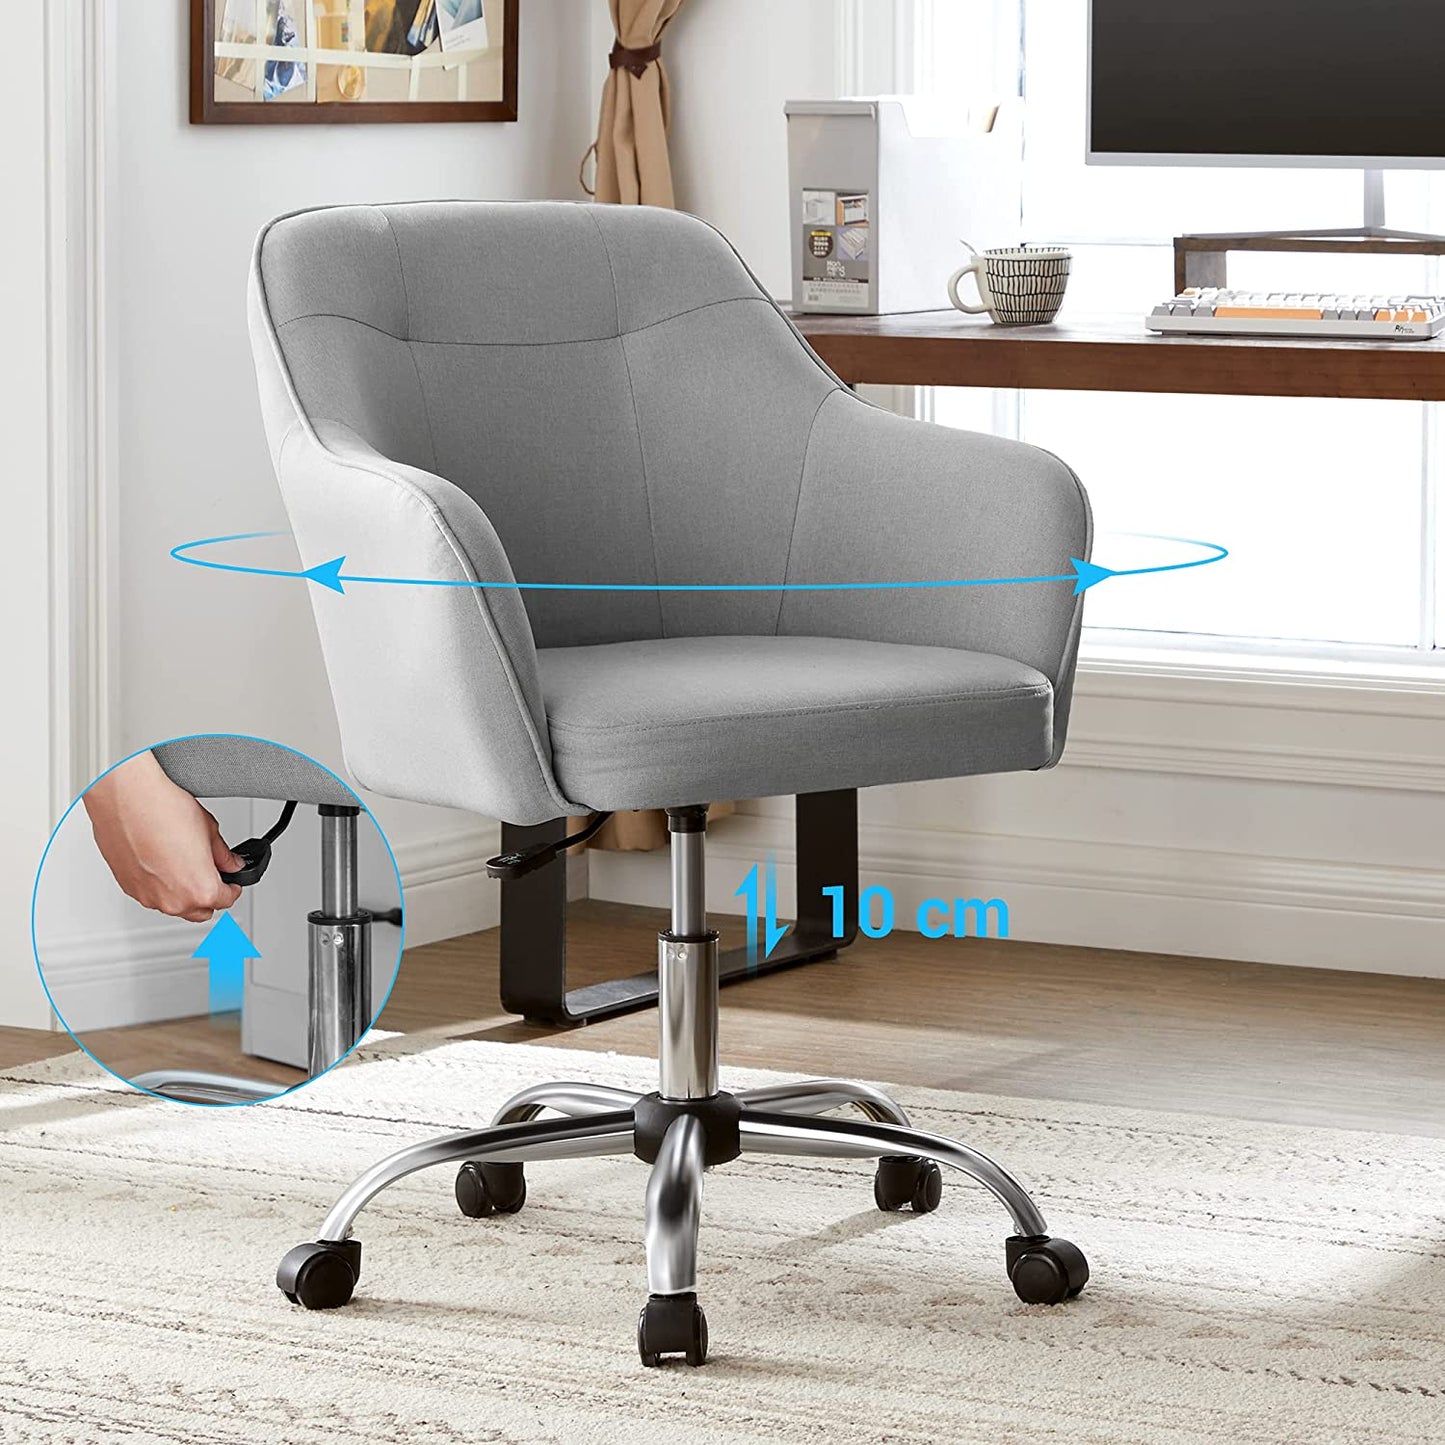 Height-adjustable office chair with steel frame